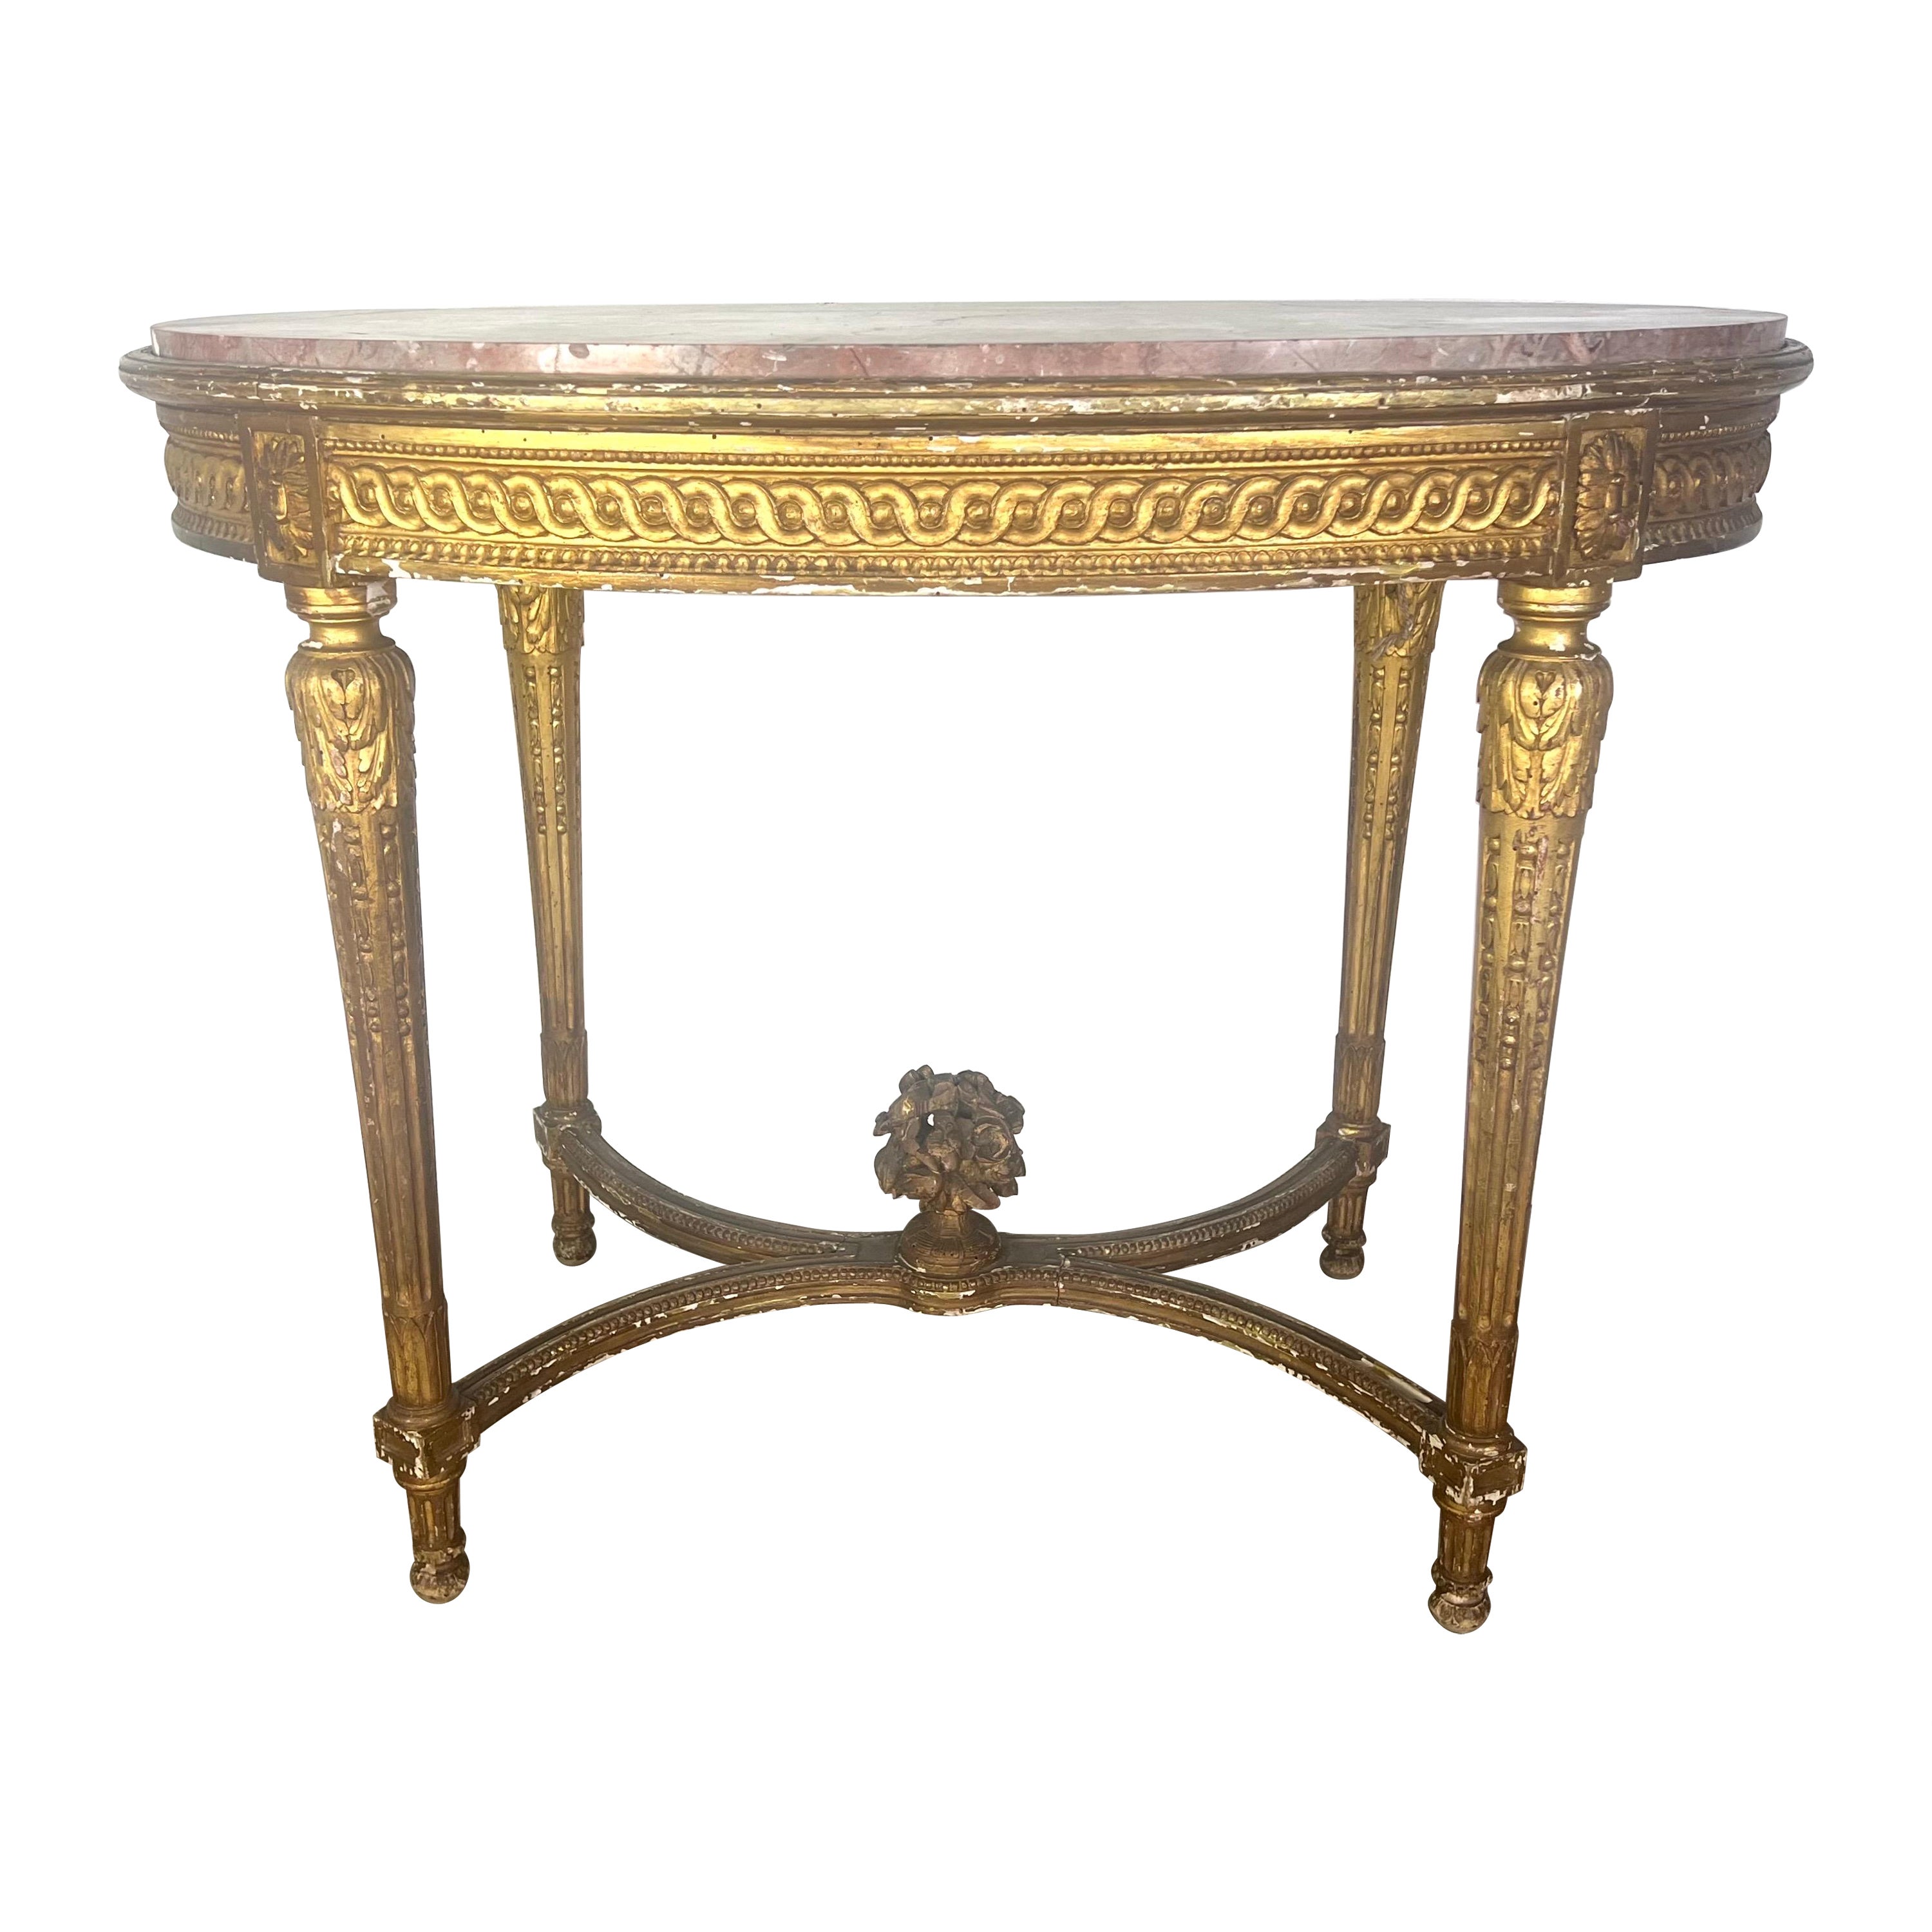 19th Century Louis XVI Style Gilt Wood Table w/ Marble Top For Sale